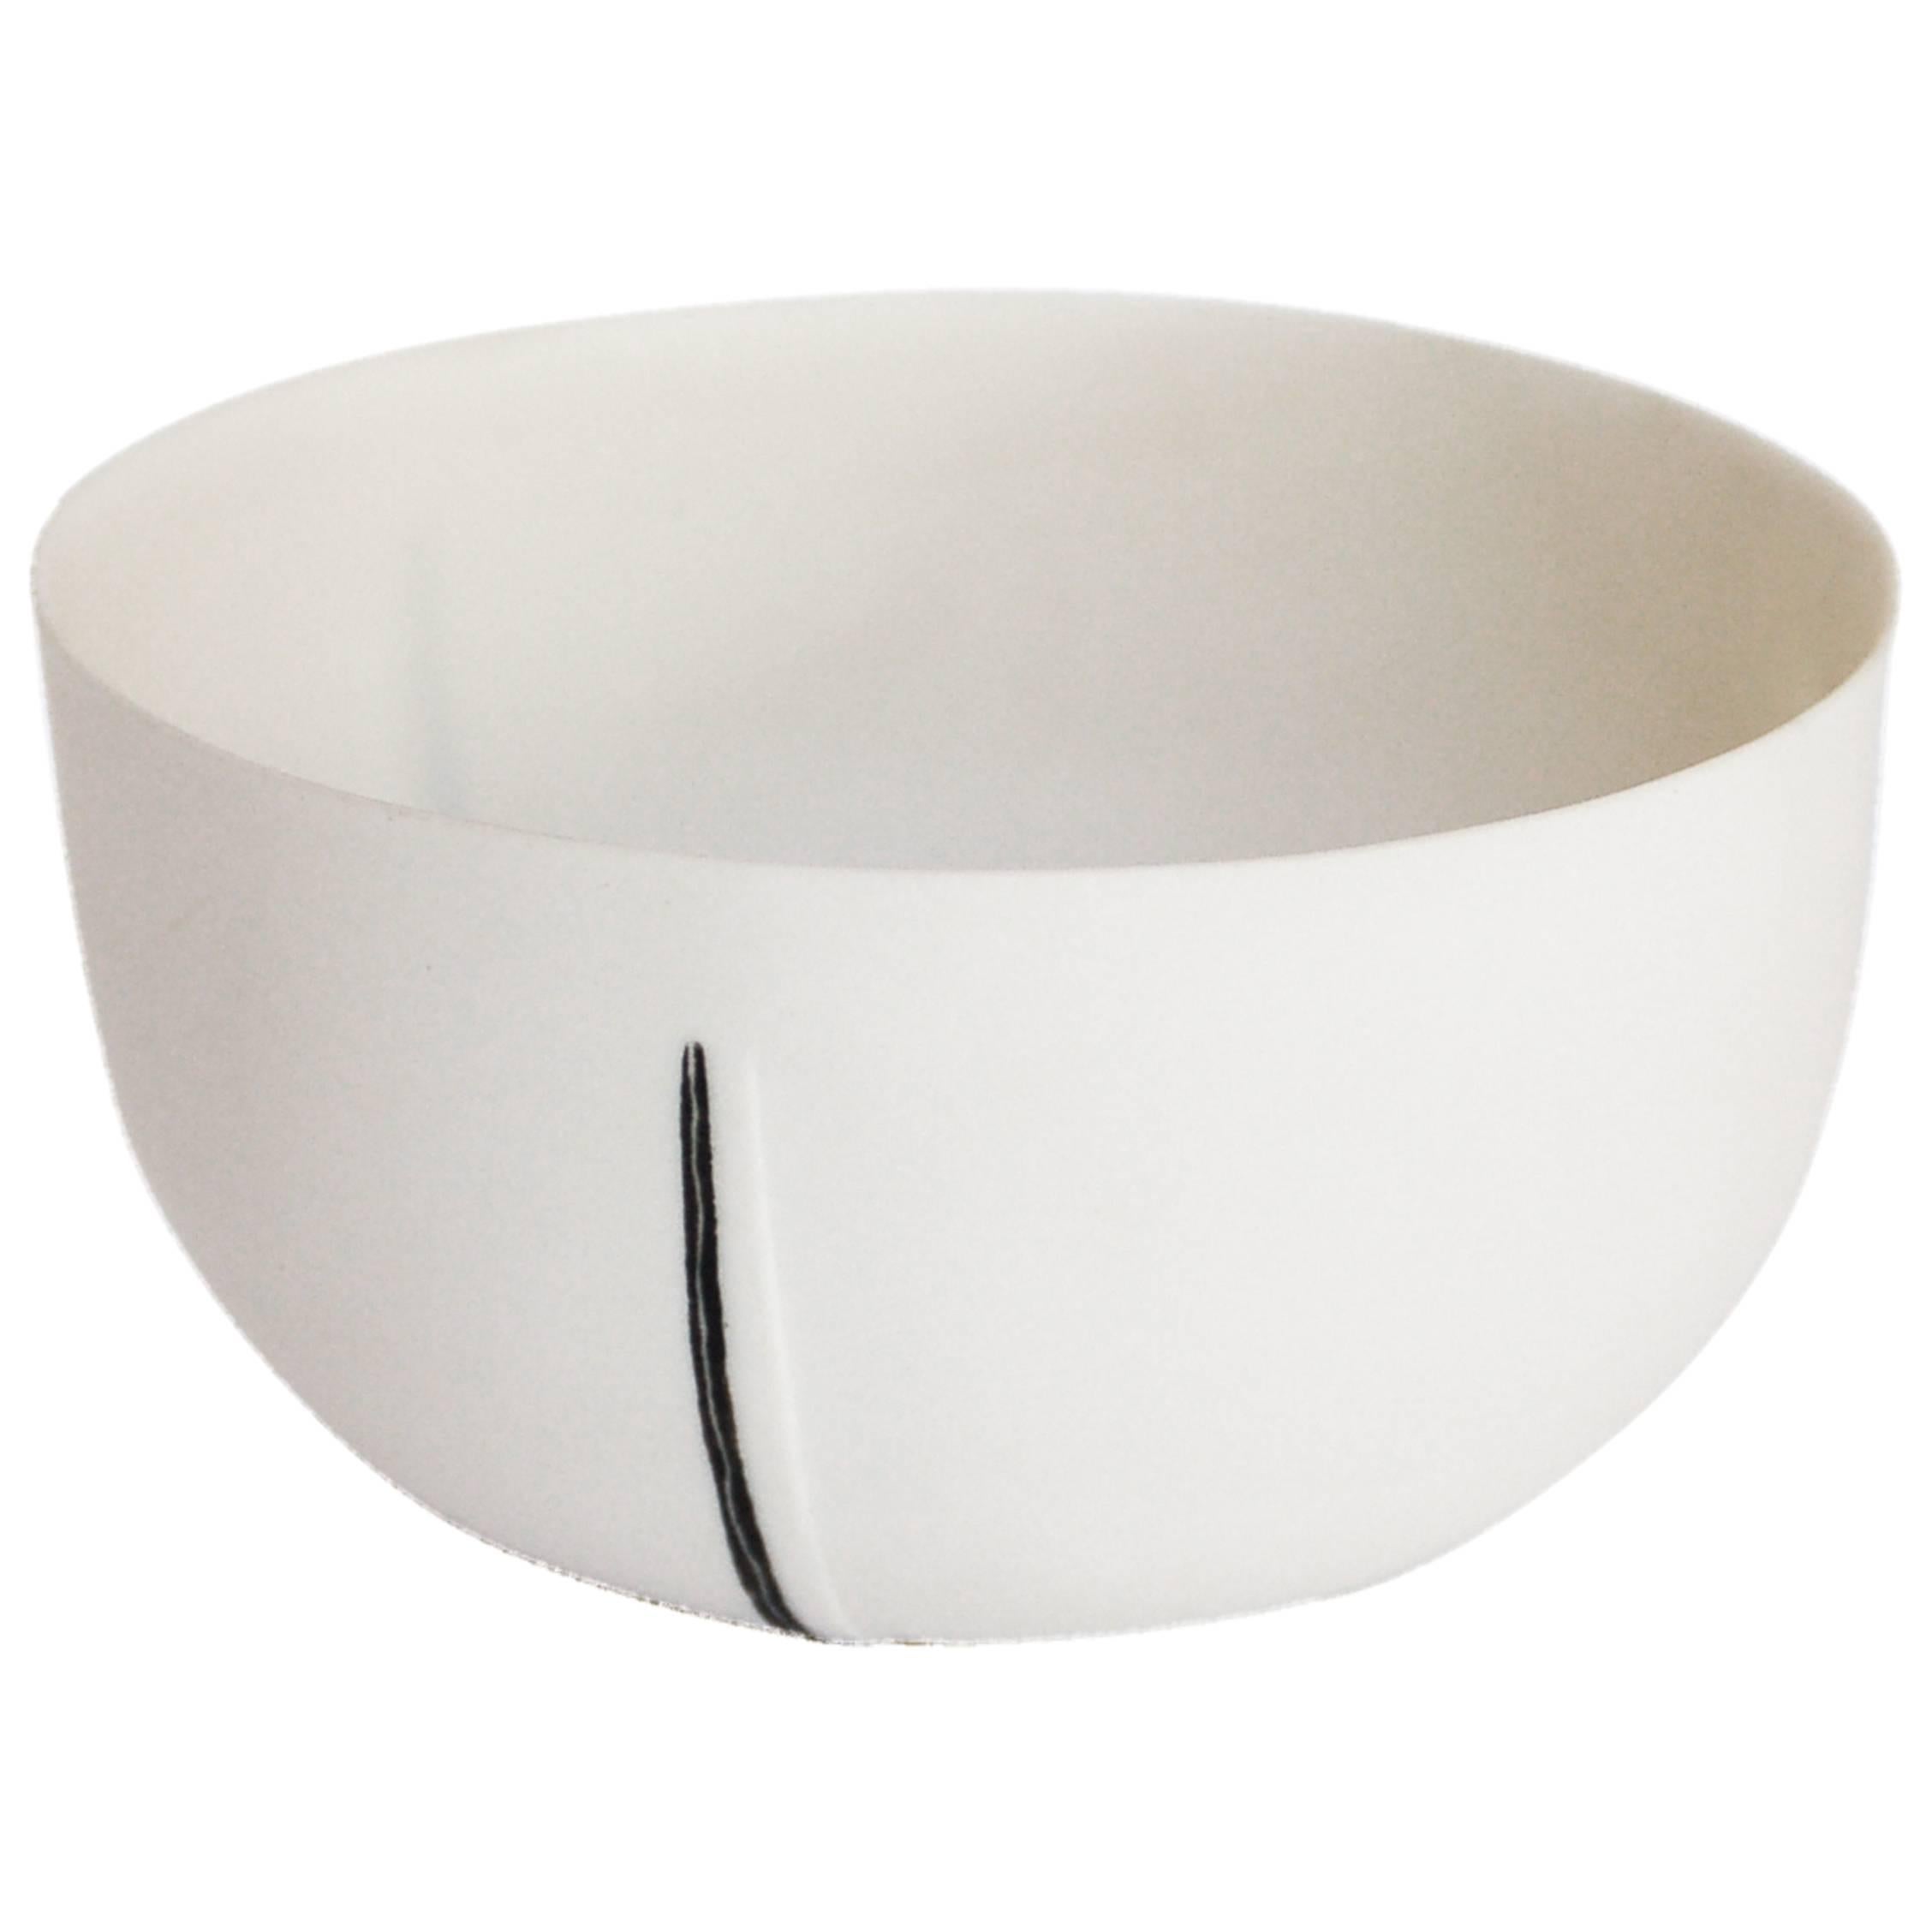 Black and White Porcelain Bowl by Carman Ballarin For Sale